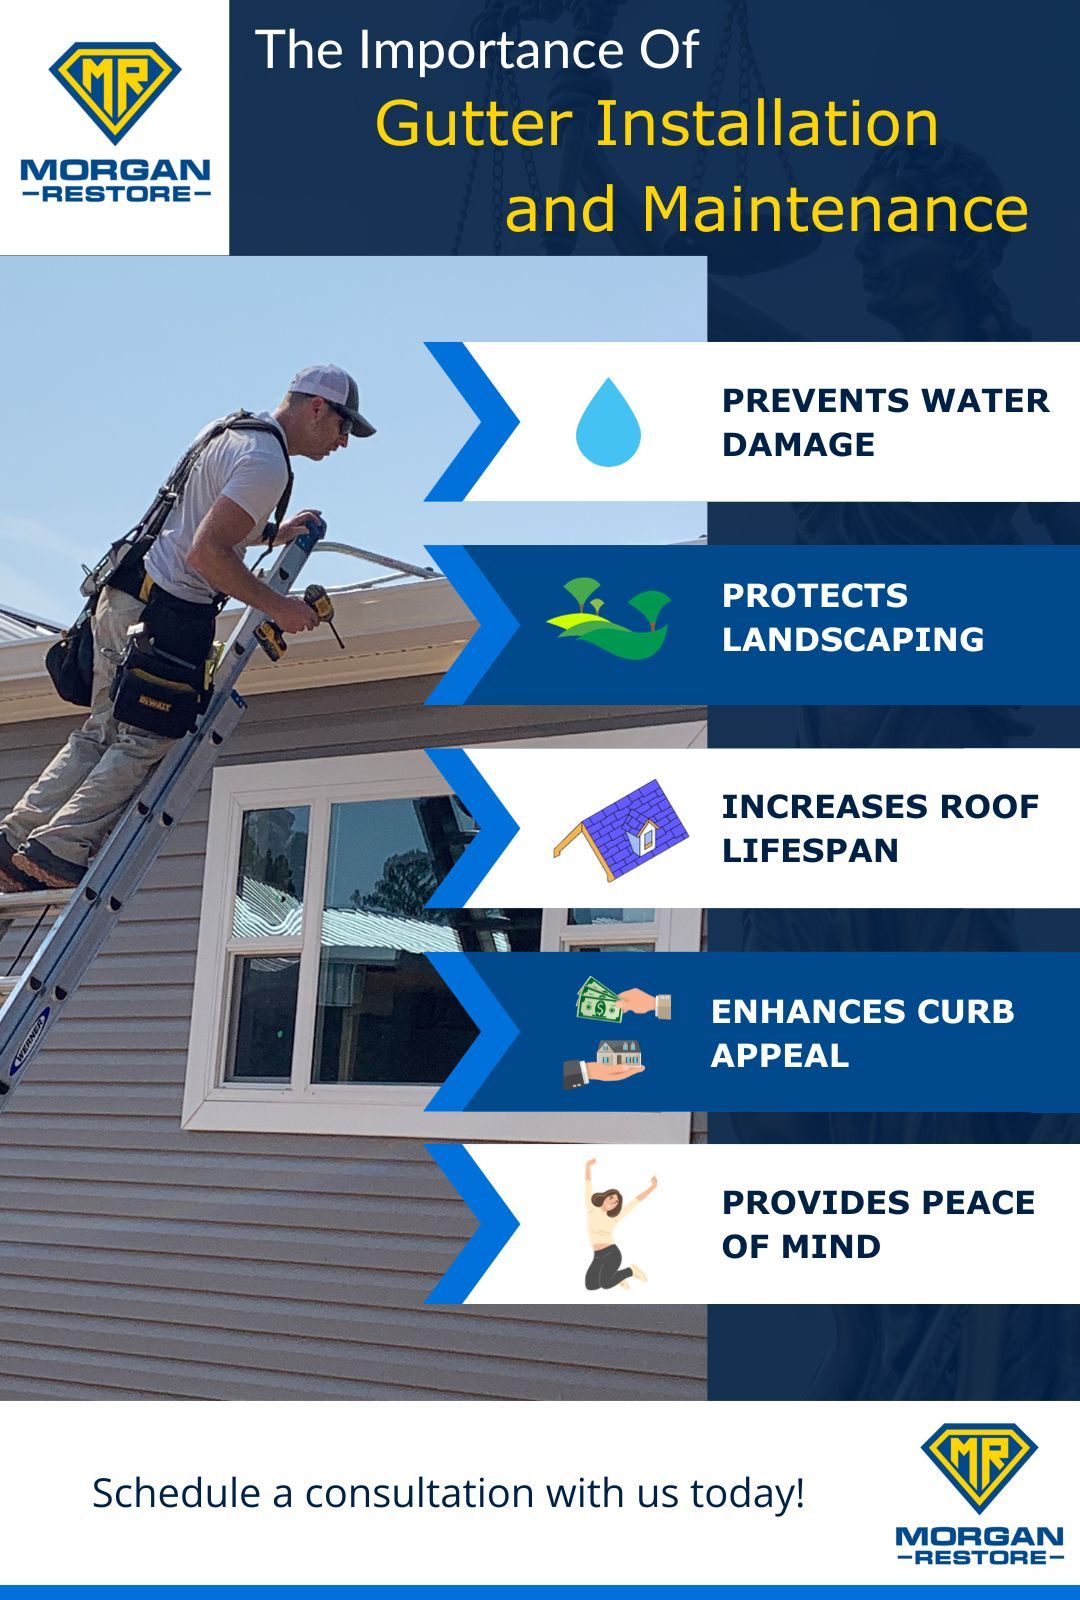 M37430 - Infographic v2 - The Importance of Gutter Installation and Maintenance.jpg